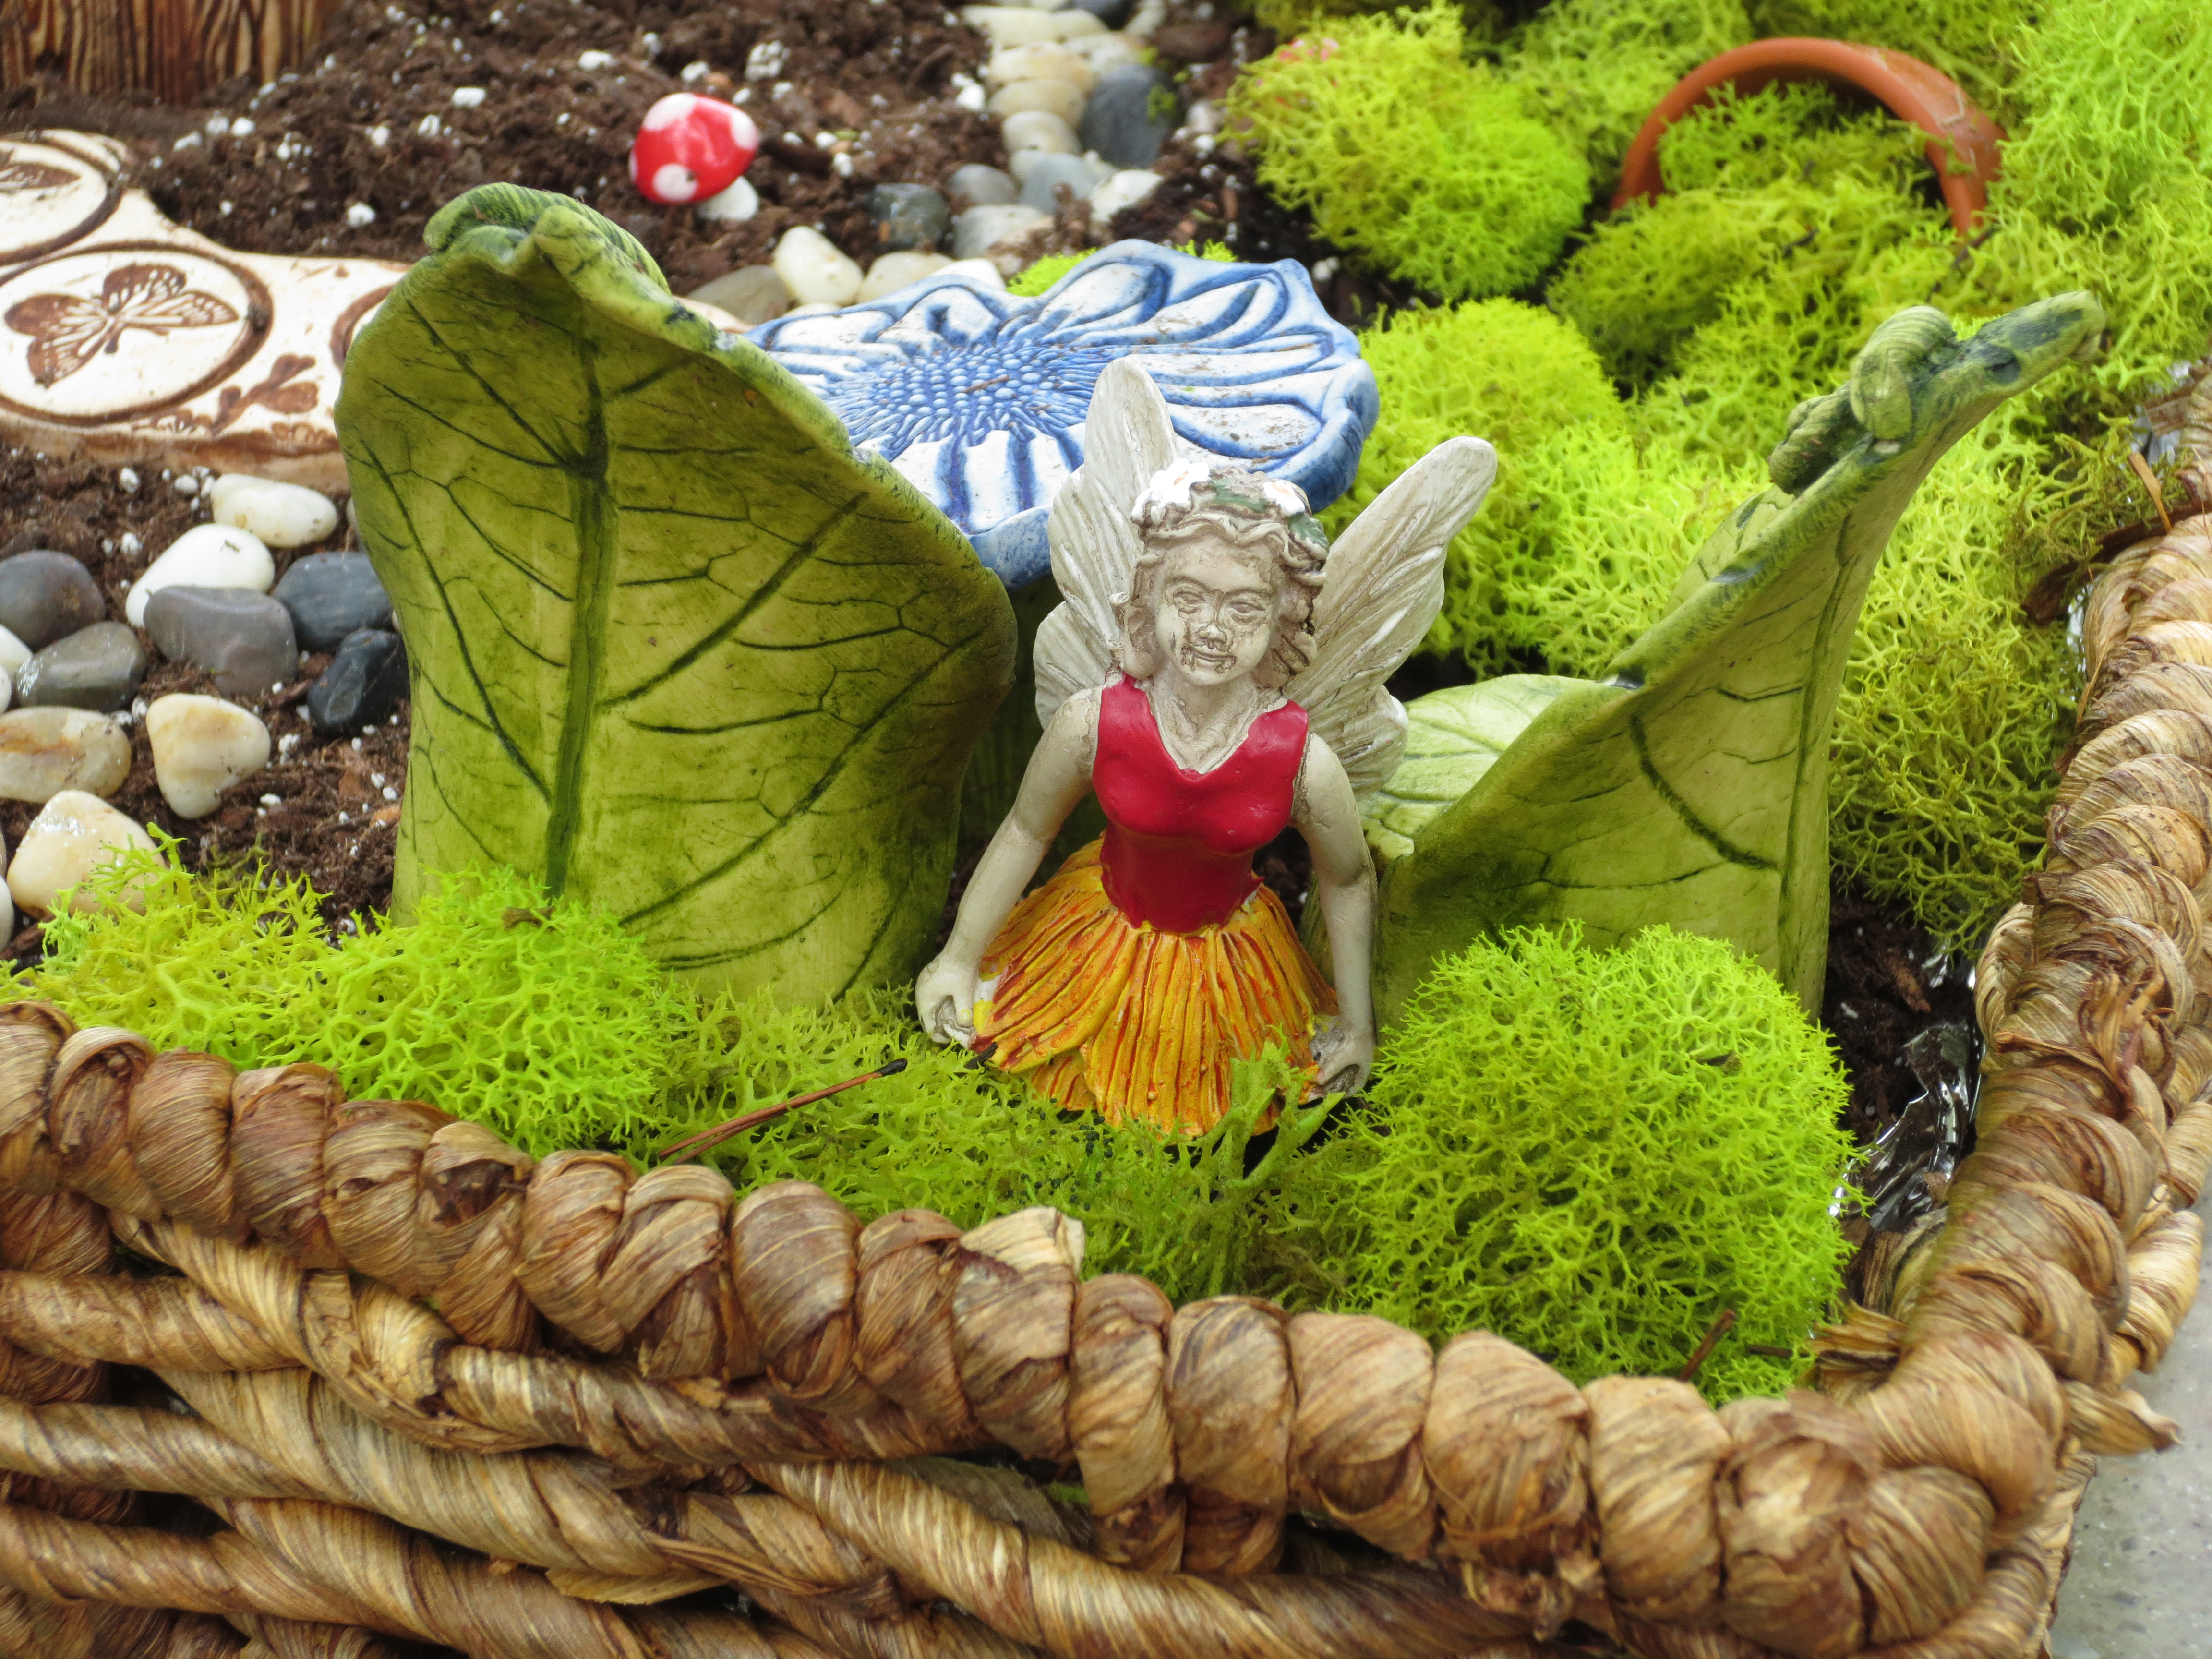 Fairy Garden Display in the Glass House